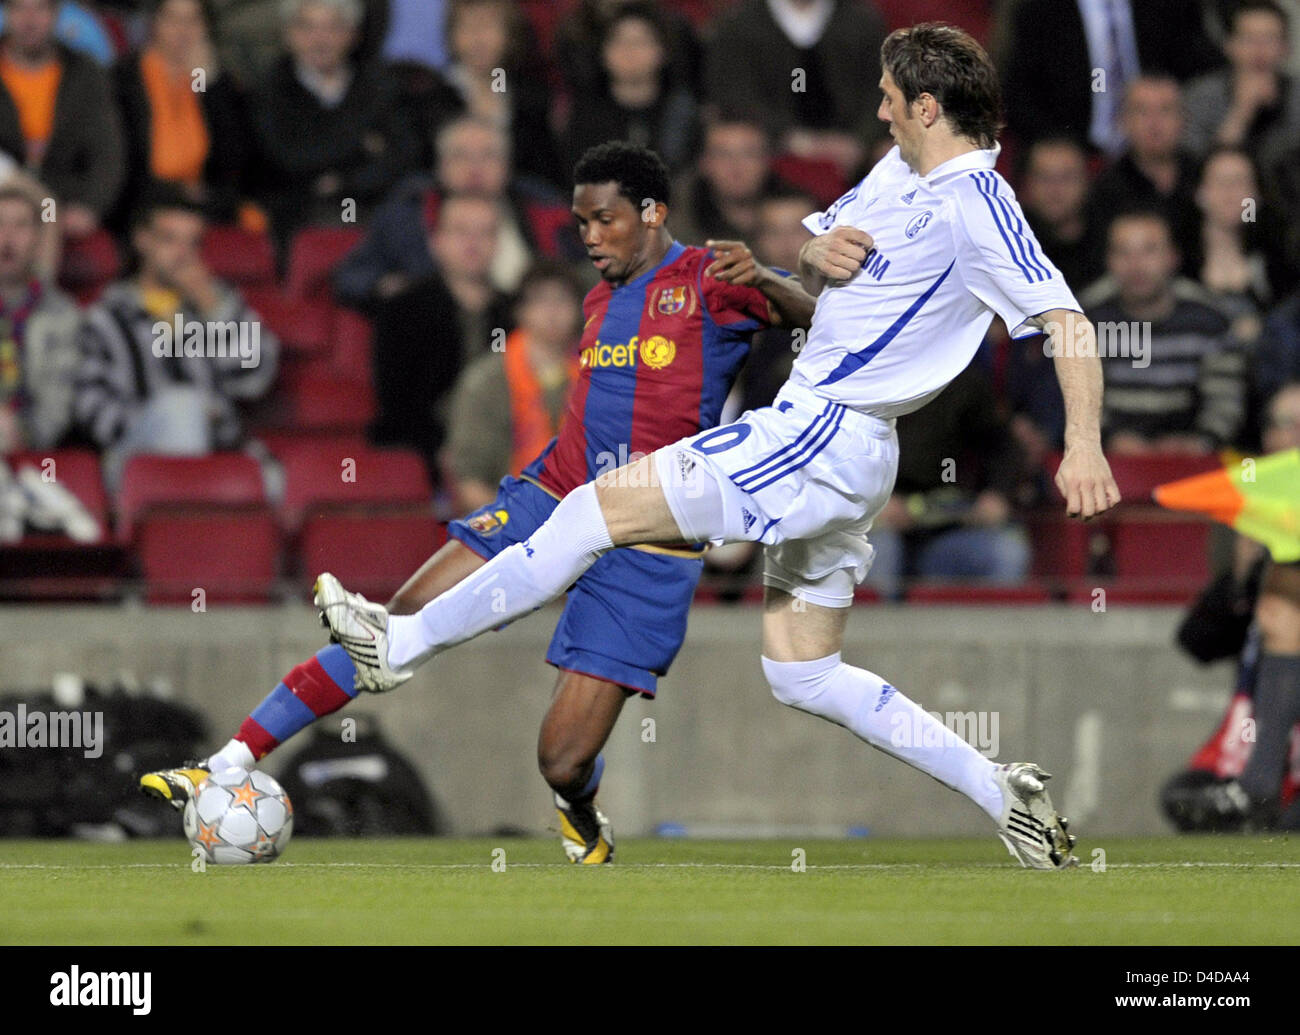 Mladen Kristajic of Schalke (R) blocks the delivery from Barcelona's Samuel Eto'o (L) in the UEFA Champions League quarter-finals match FC Barcelona v FC Schalke 04 at Camp Nuo stadium of Barcelona, Spain, 09 April 2008. A weak Spanish Primera Division side Barcelona won over German Bundesliga squad Schalke 1-0 and moves up to semi-finals with a 2-0 win on aggregate. Photo: Achim S Stock Photo